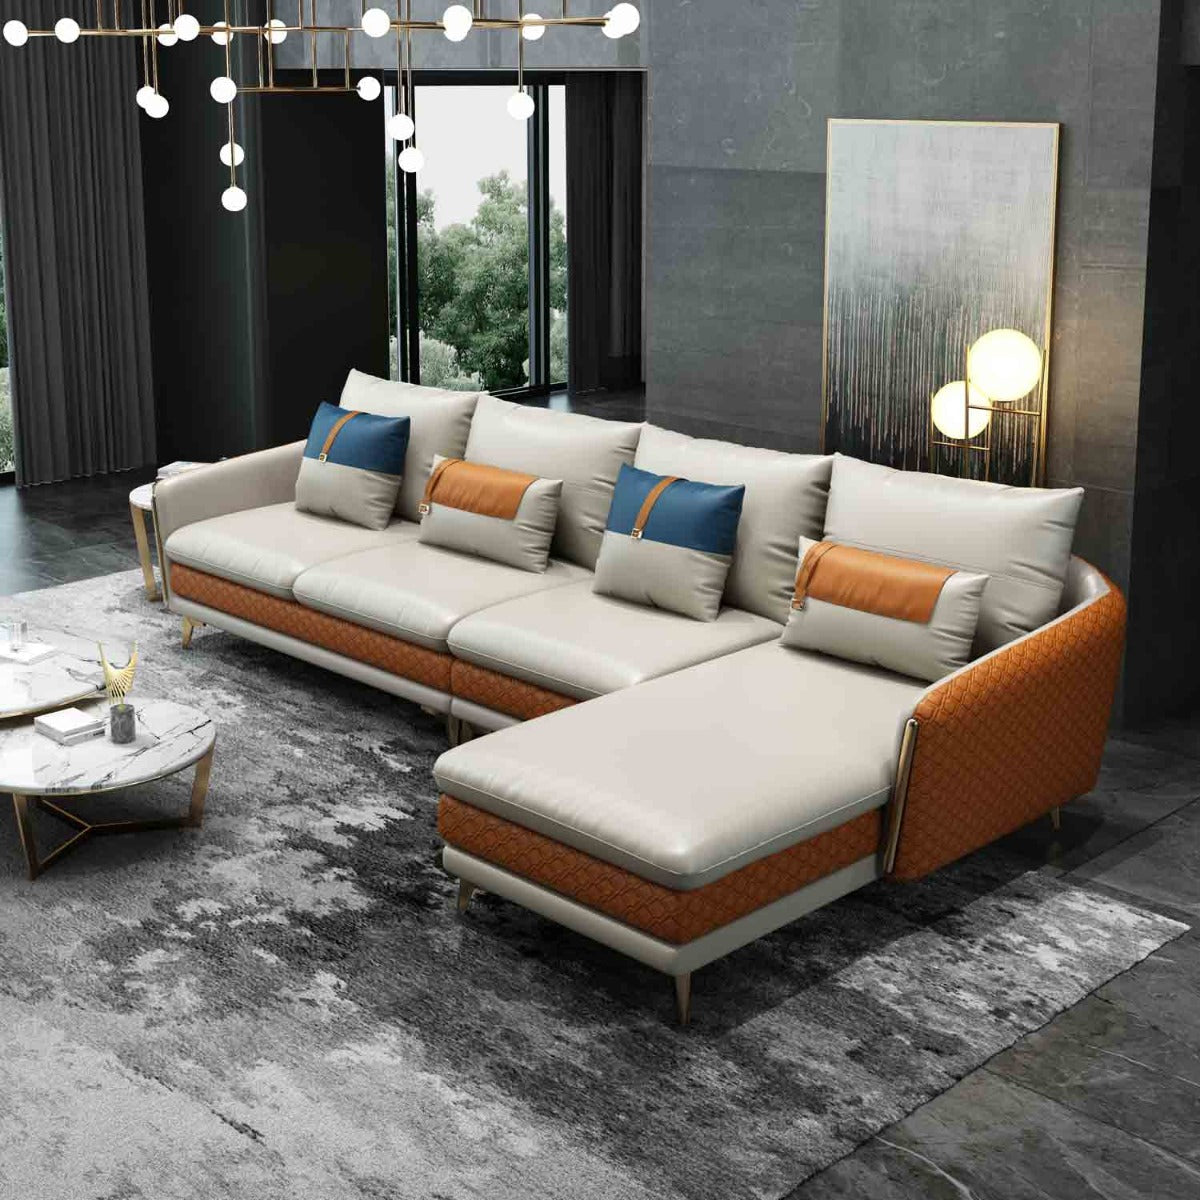 European Furniture - Icaro Right Hand Facing Sectional in Off White-Orange - 64433R-4RHF - New Star Living